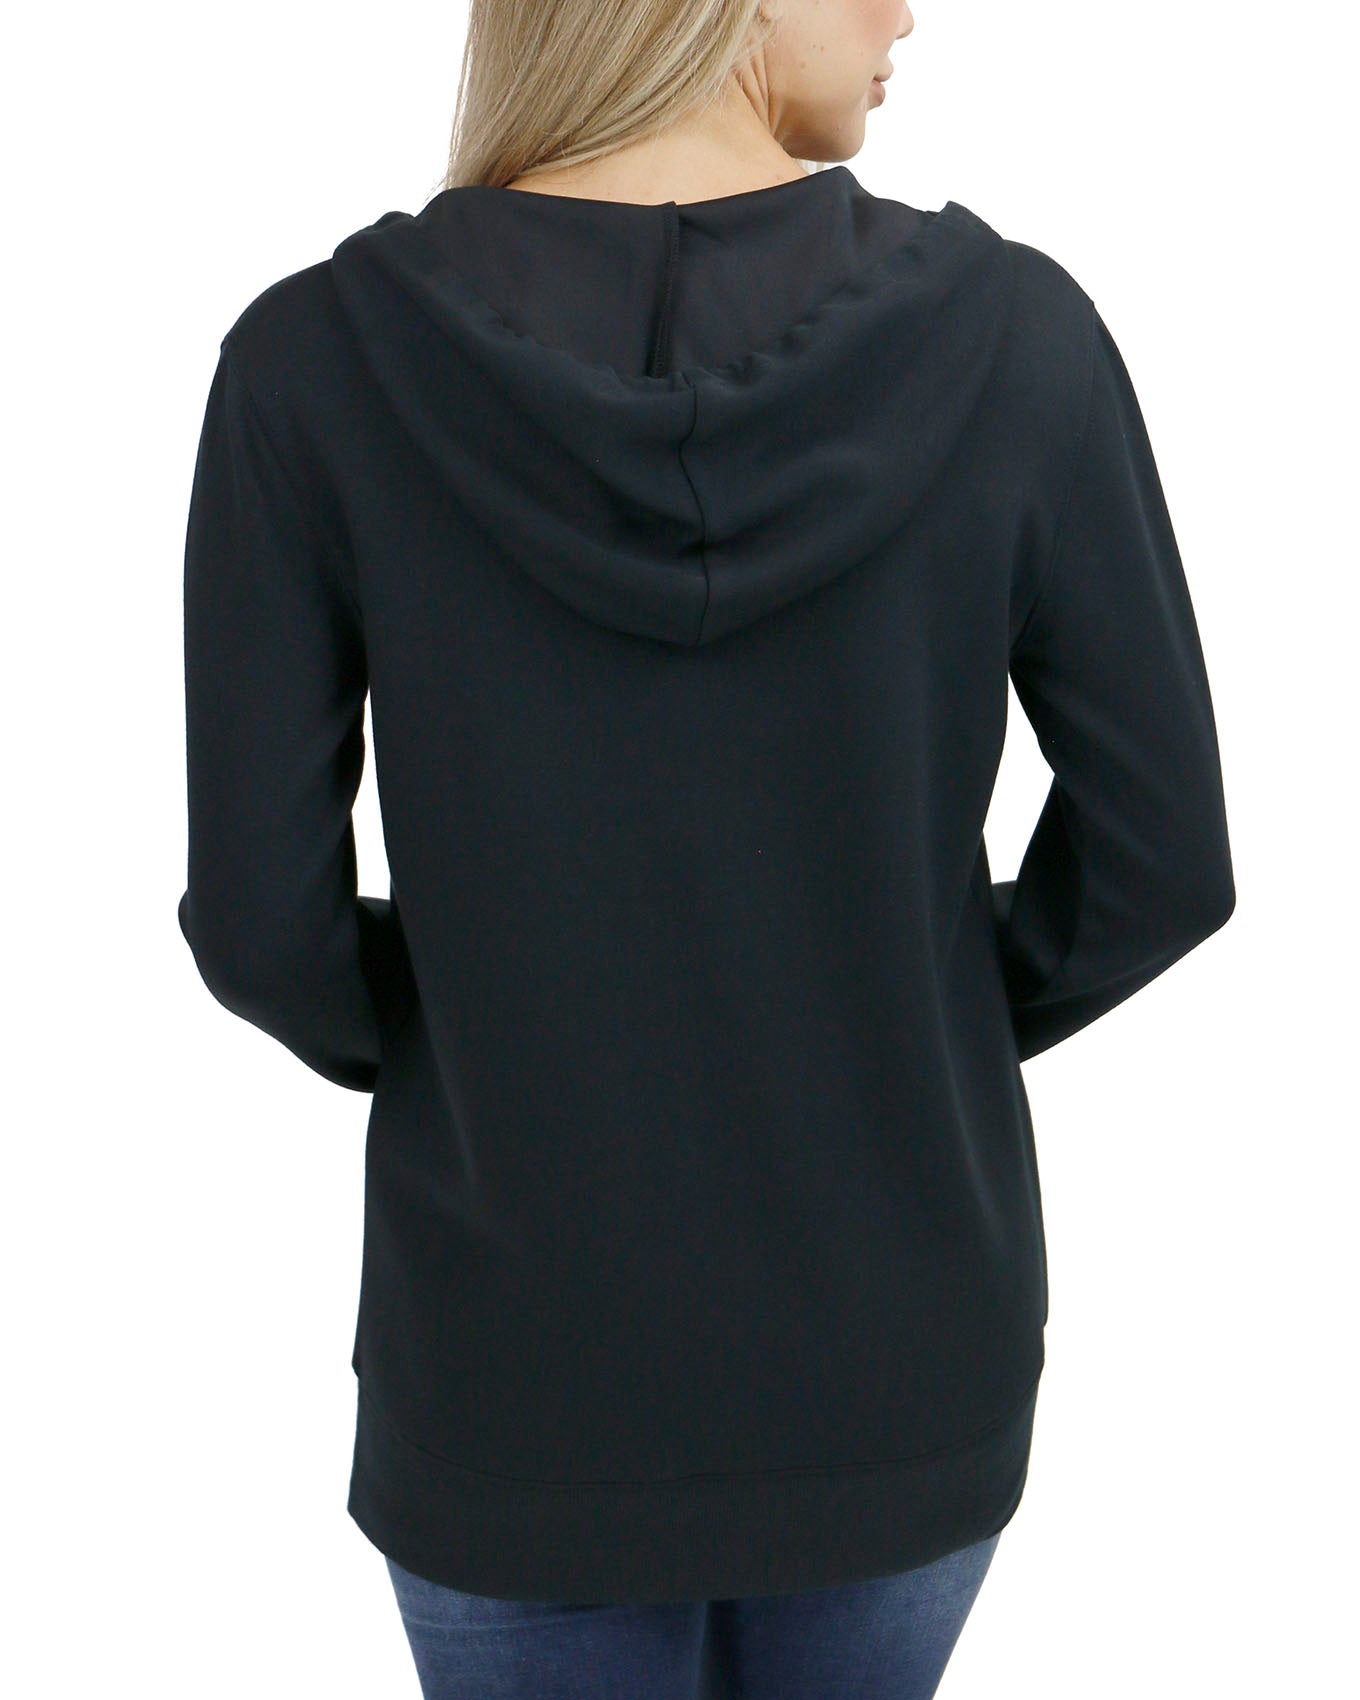 back view stock shot of black hooded pullover